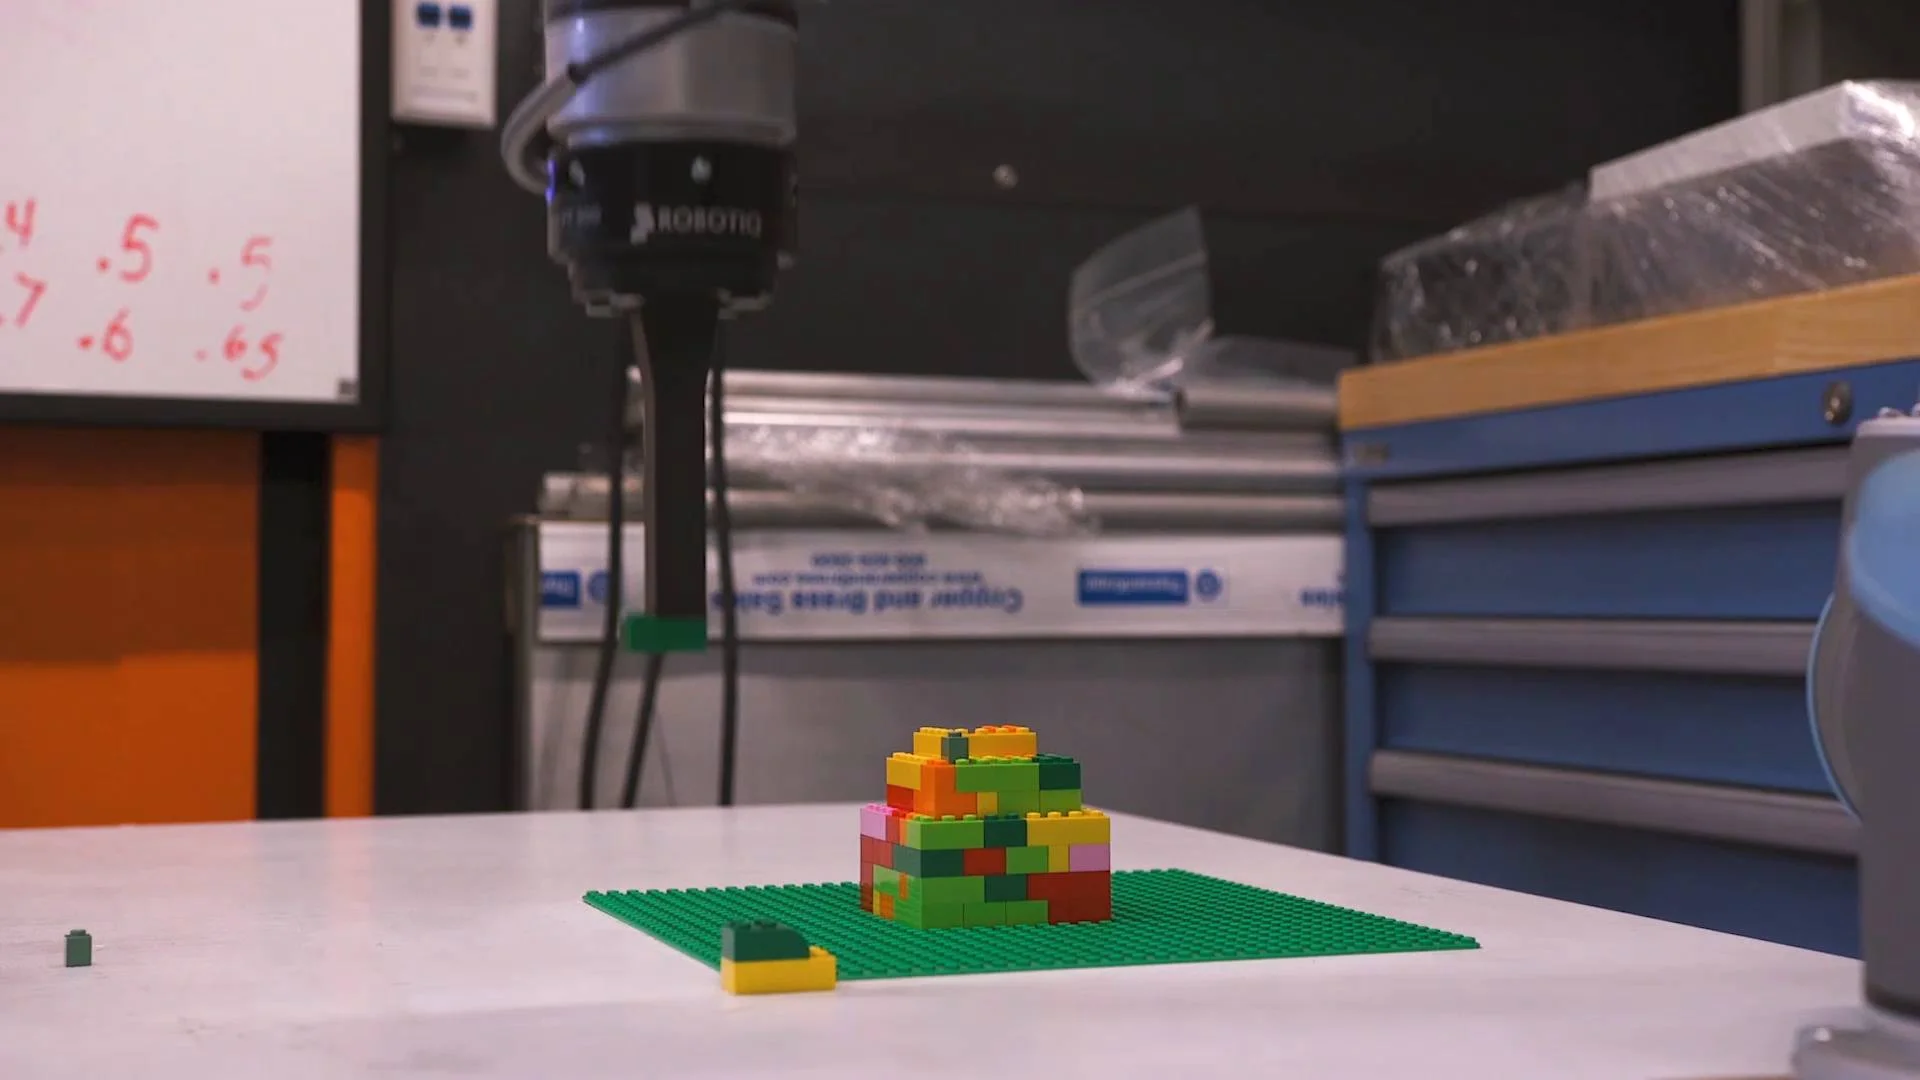 legobot 3D printer made entirely out of LEGO